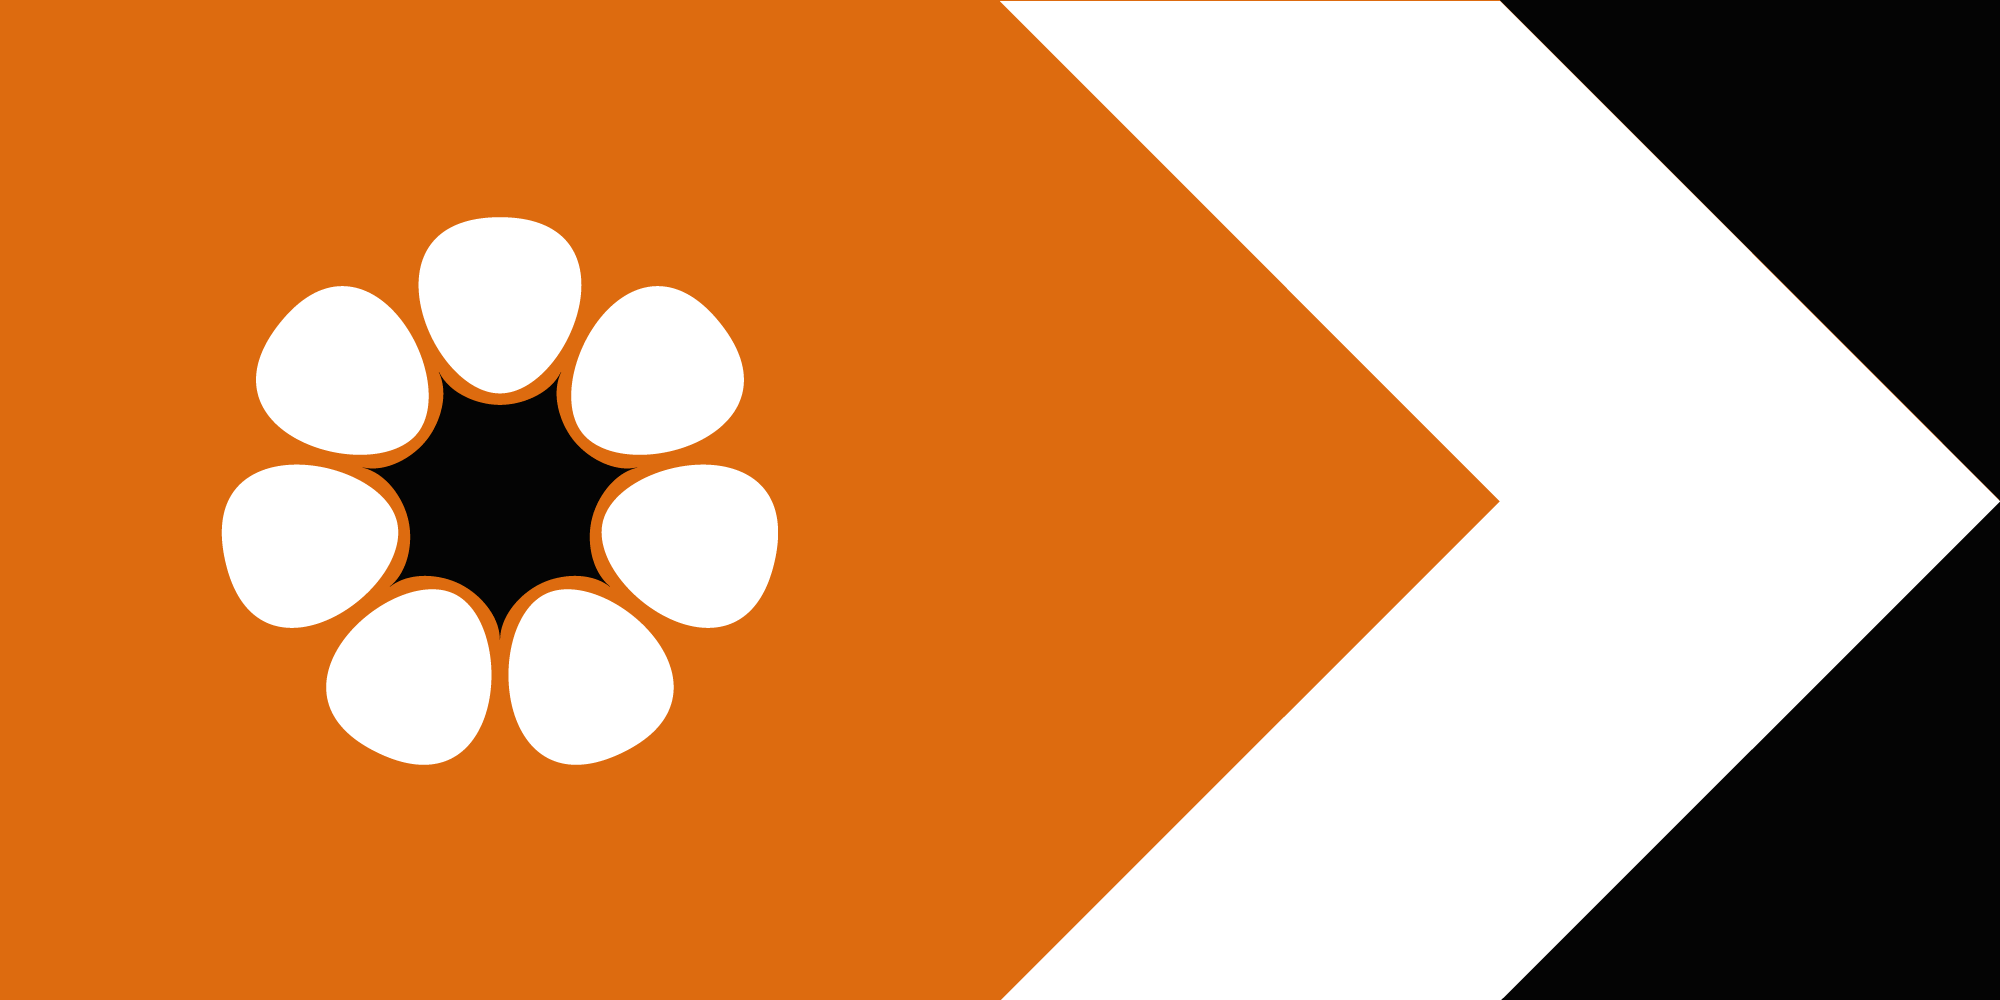 A state flag proposal for NT